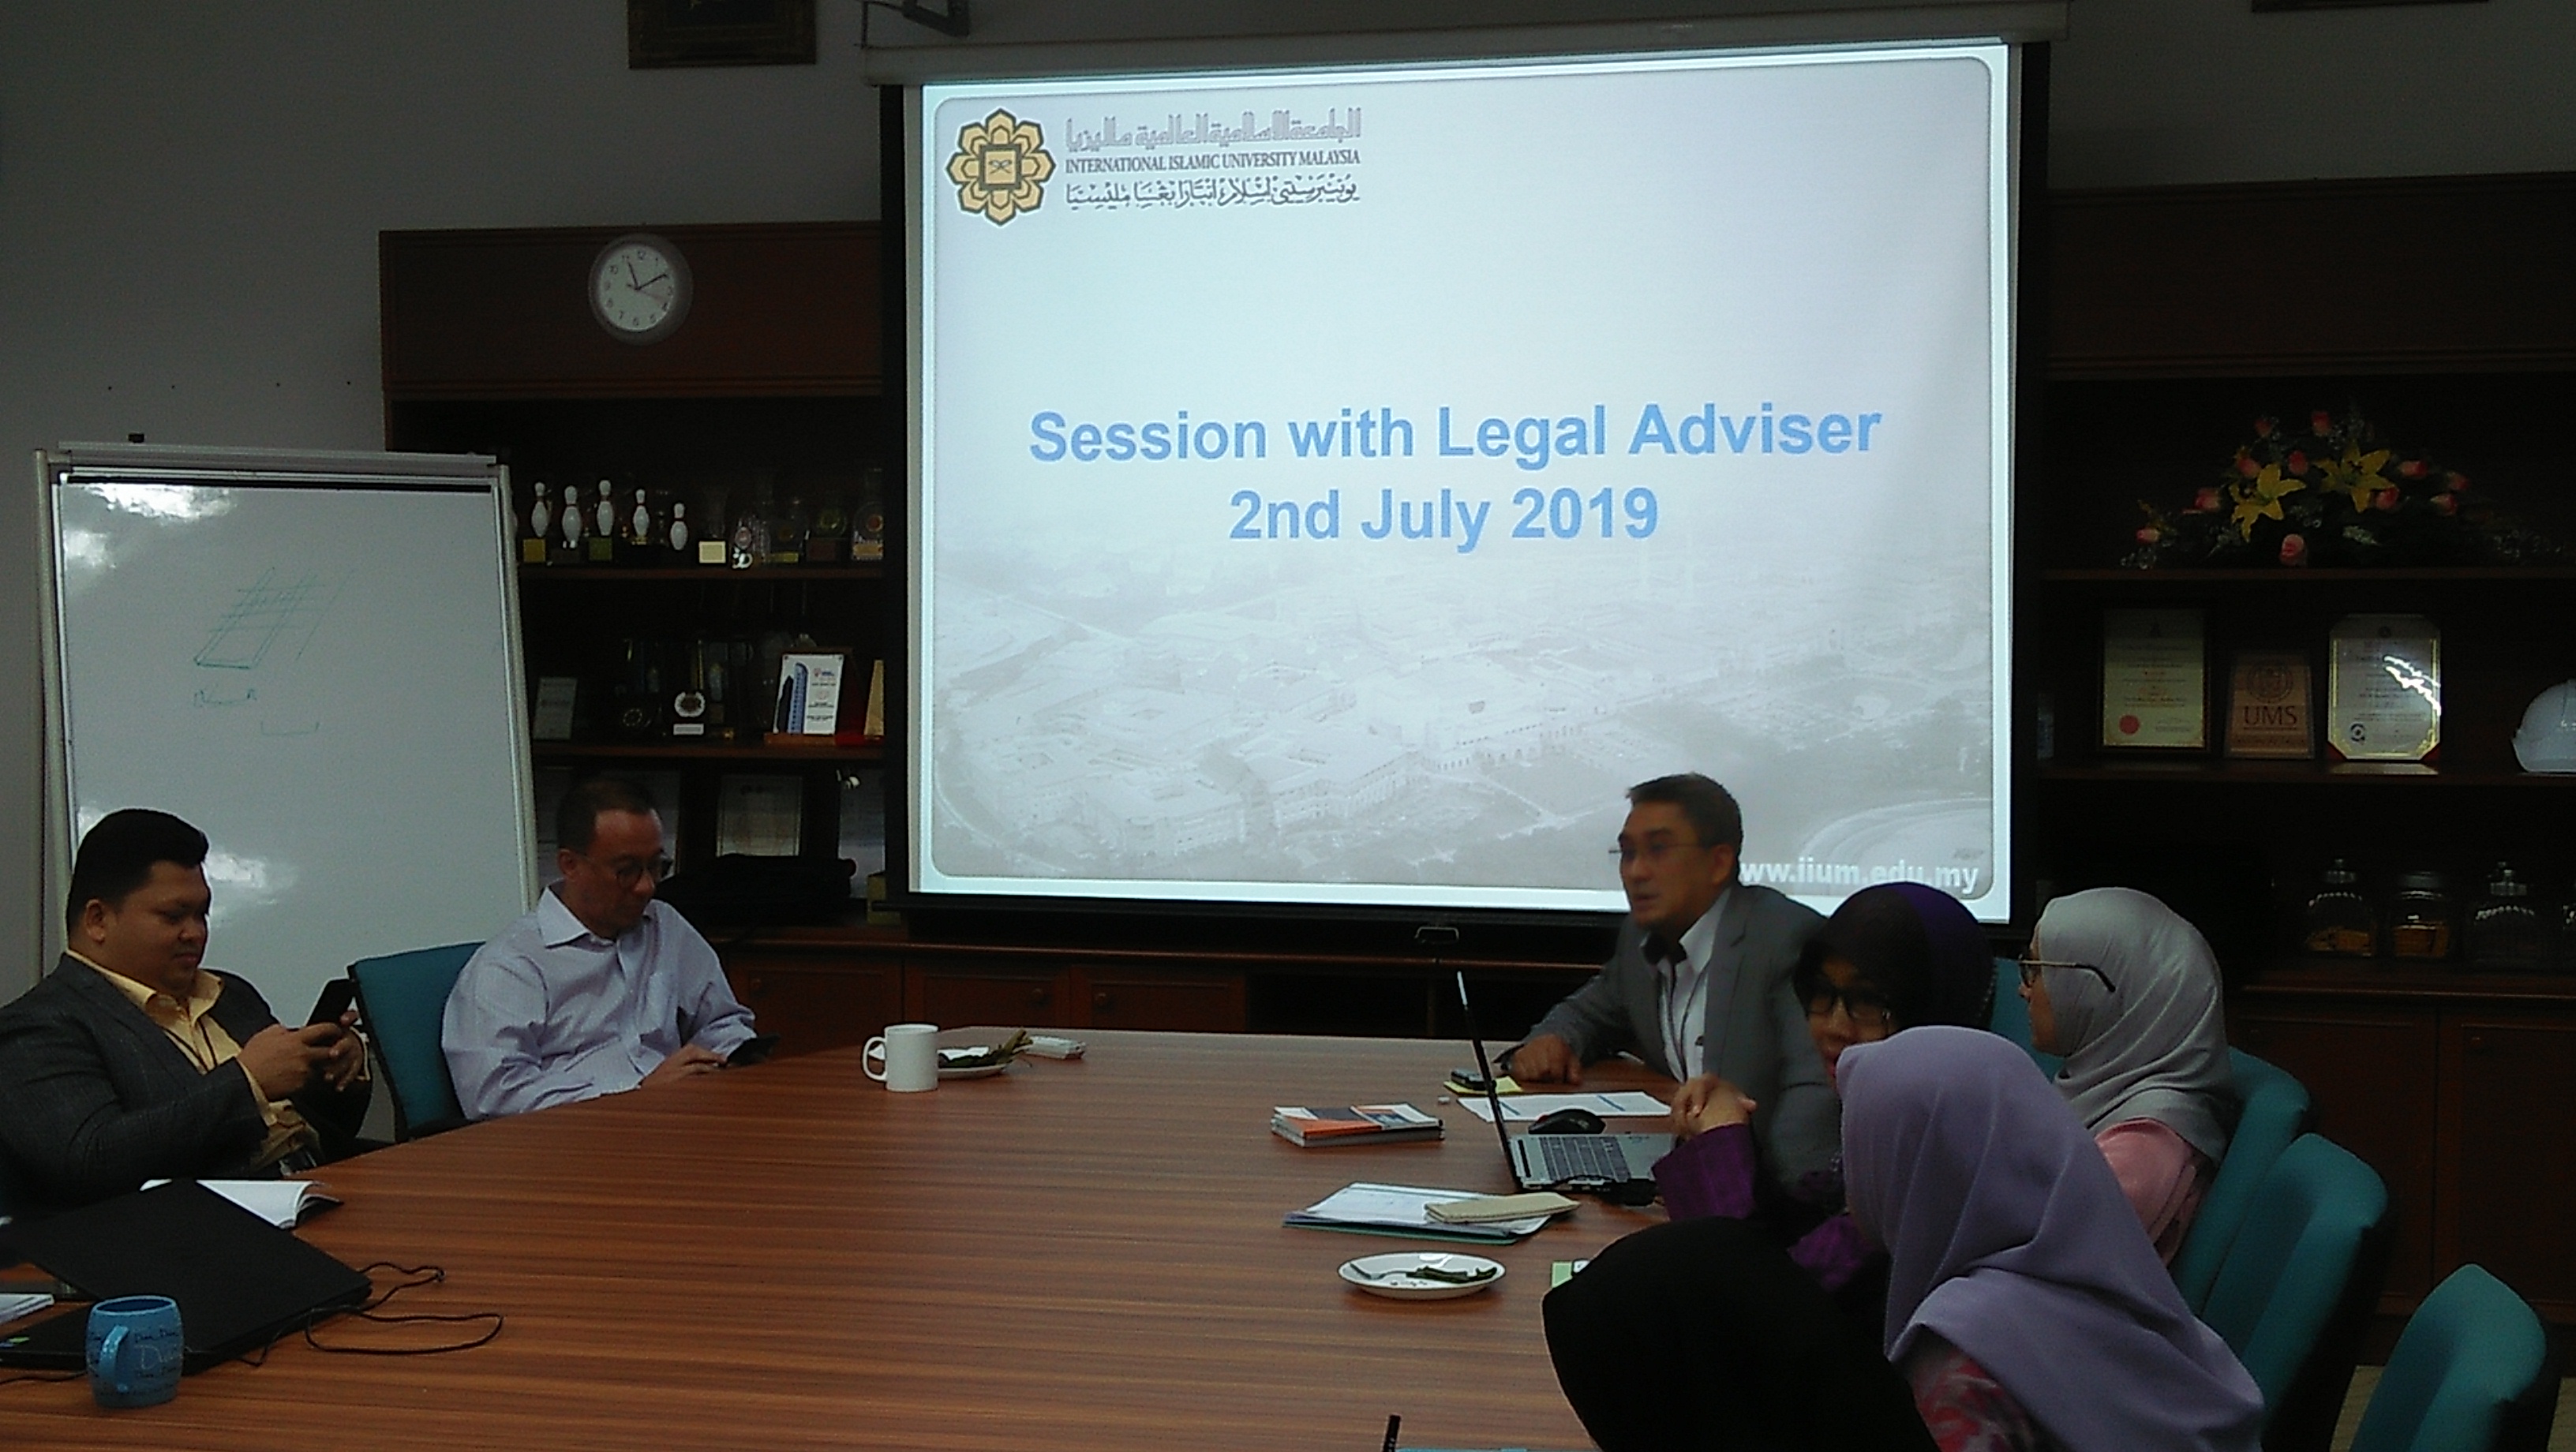 SHARING SESSION WITH THE LEGAL ADVISER